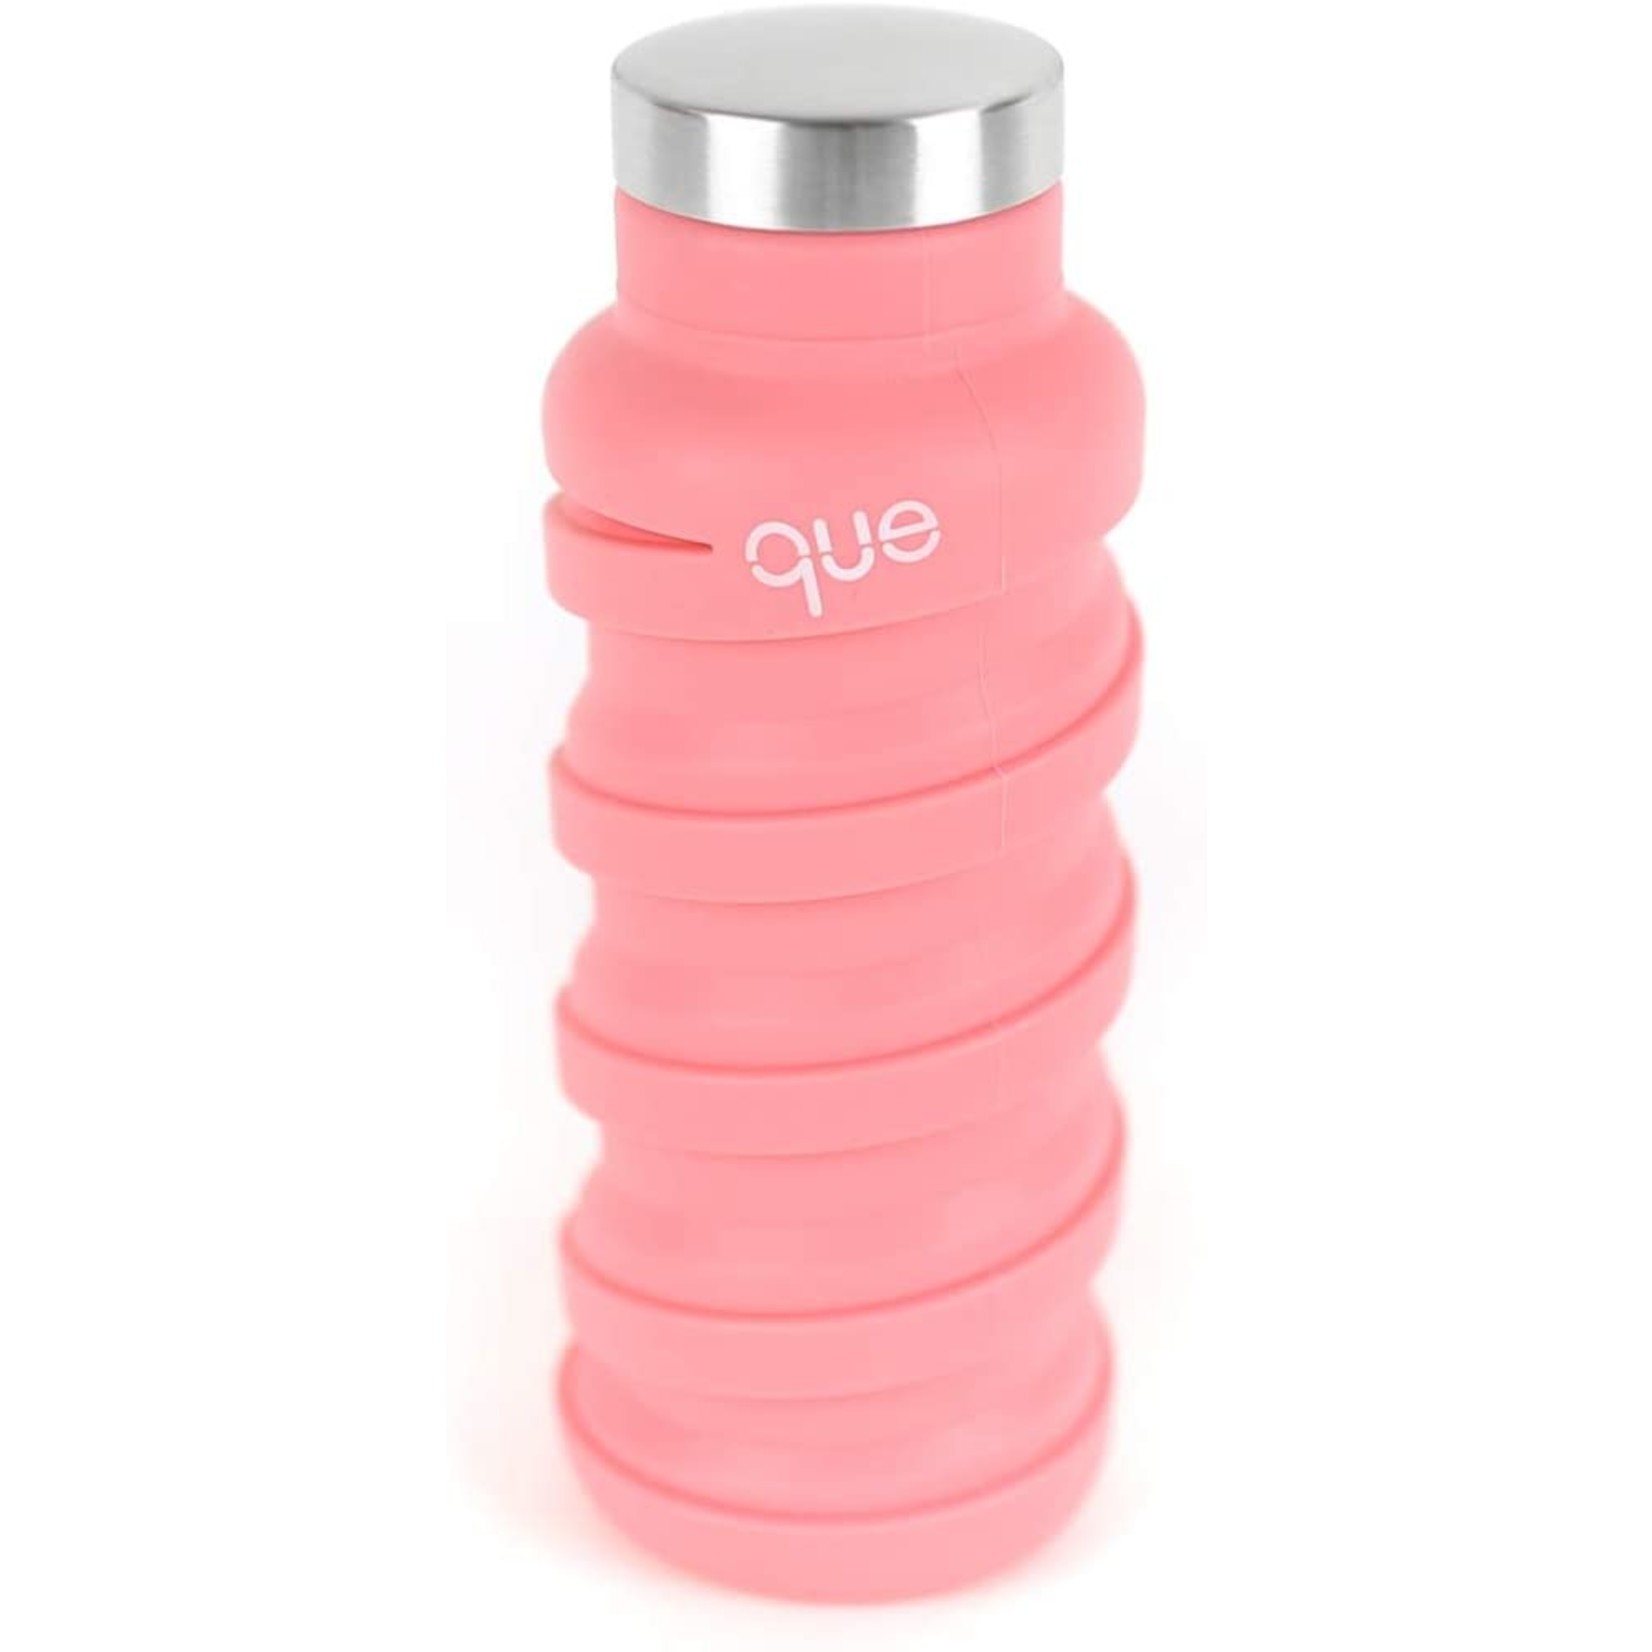 Que Bottle 12 oz in Coral Pink